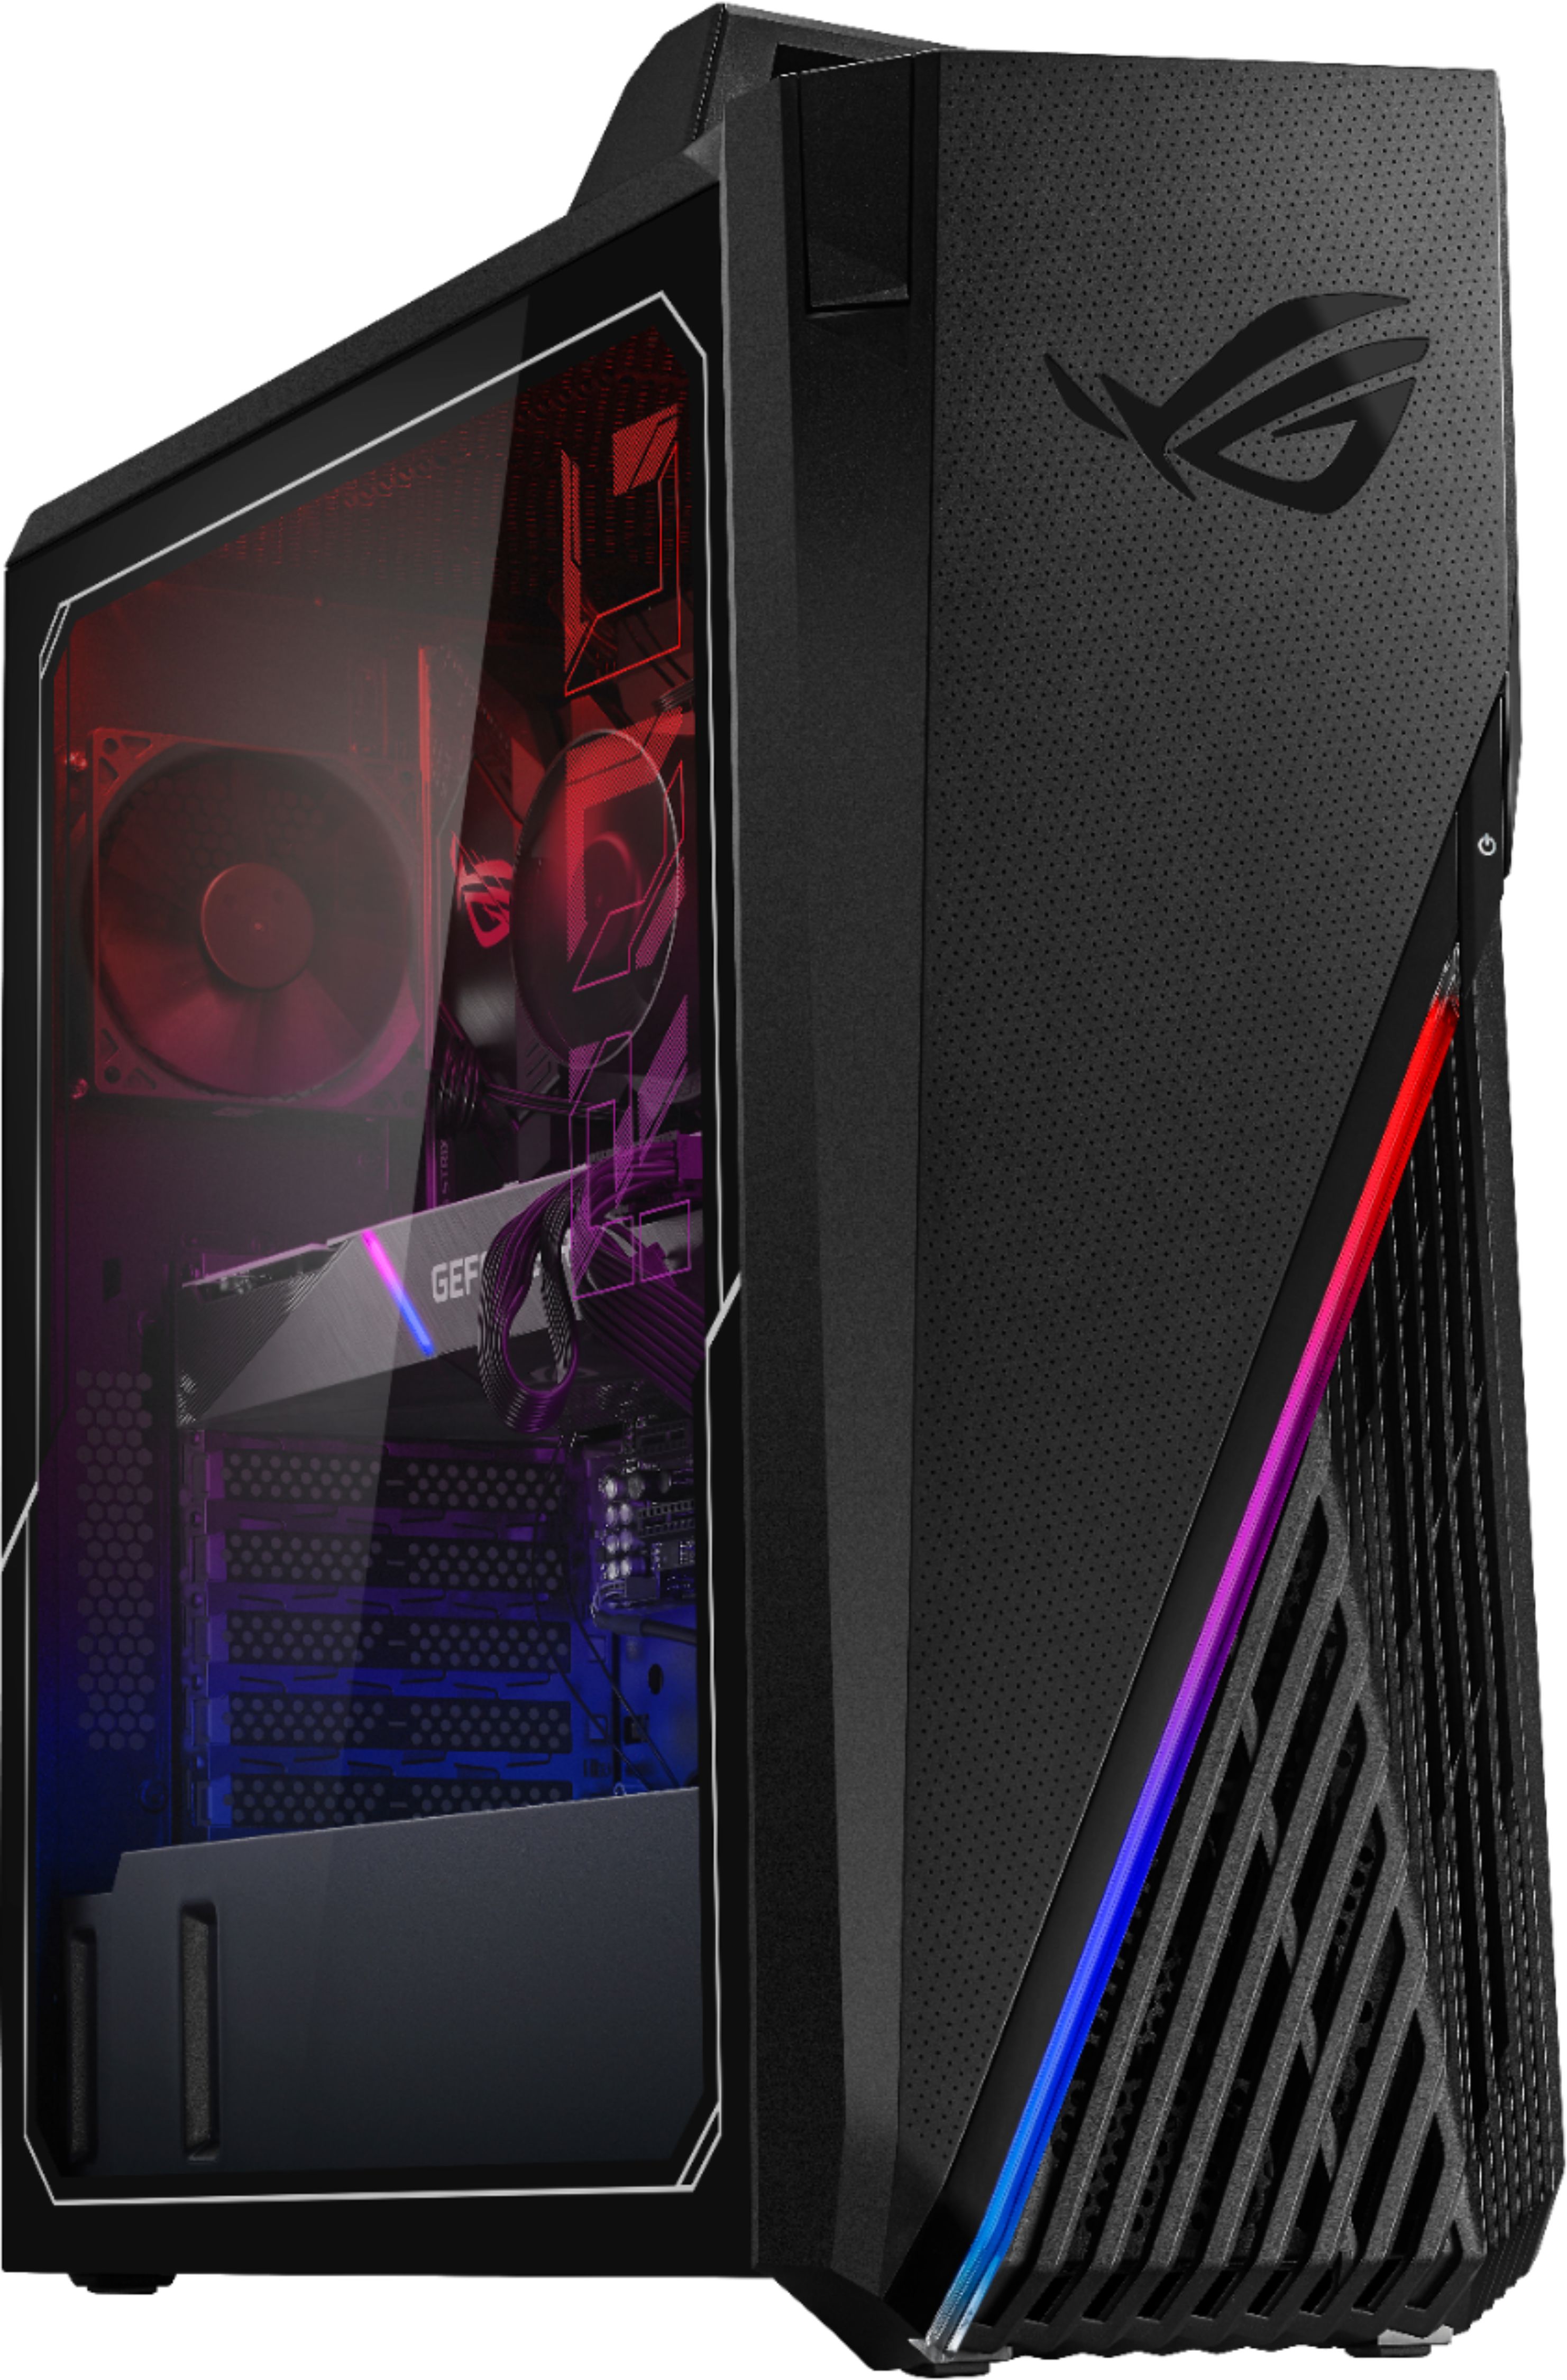 LIMITED TIME DEAL: ASUS - ROG Gaming Desktop - Intel Core i7-11700KF - 16GB Memory - NVIDIA GeForce RTX 3080 - 2TB HDD + 512GB SSD $1249.99 at Best Buy